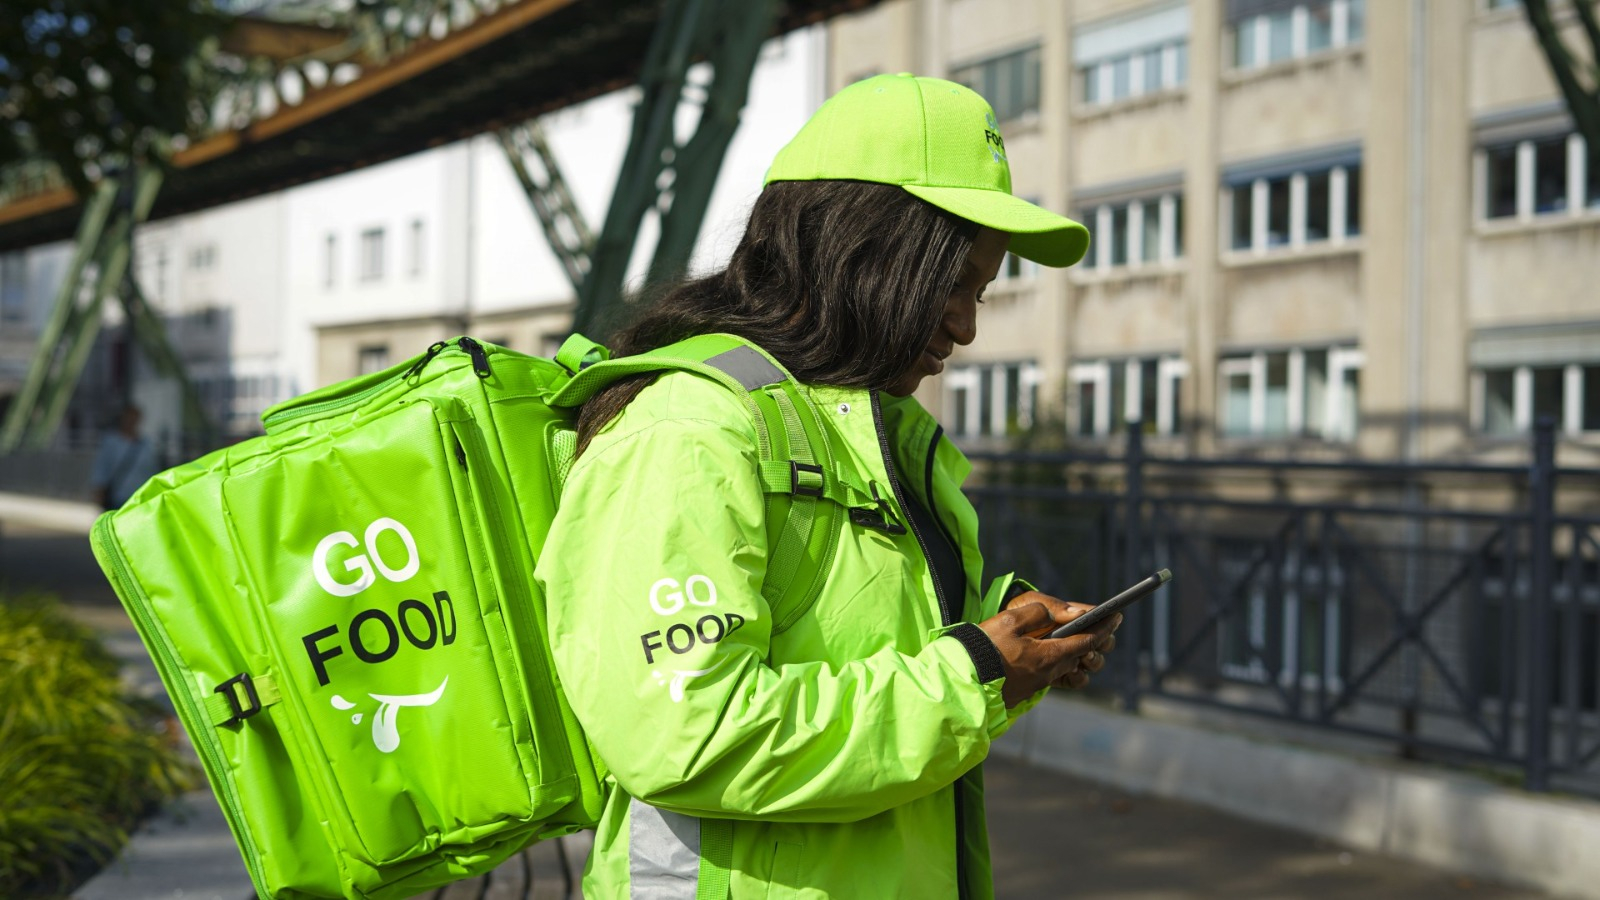 Delivery worker in ‘GO FOOD’ uniform using a smartphone, with a bridge and city buildings in the background